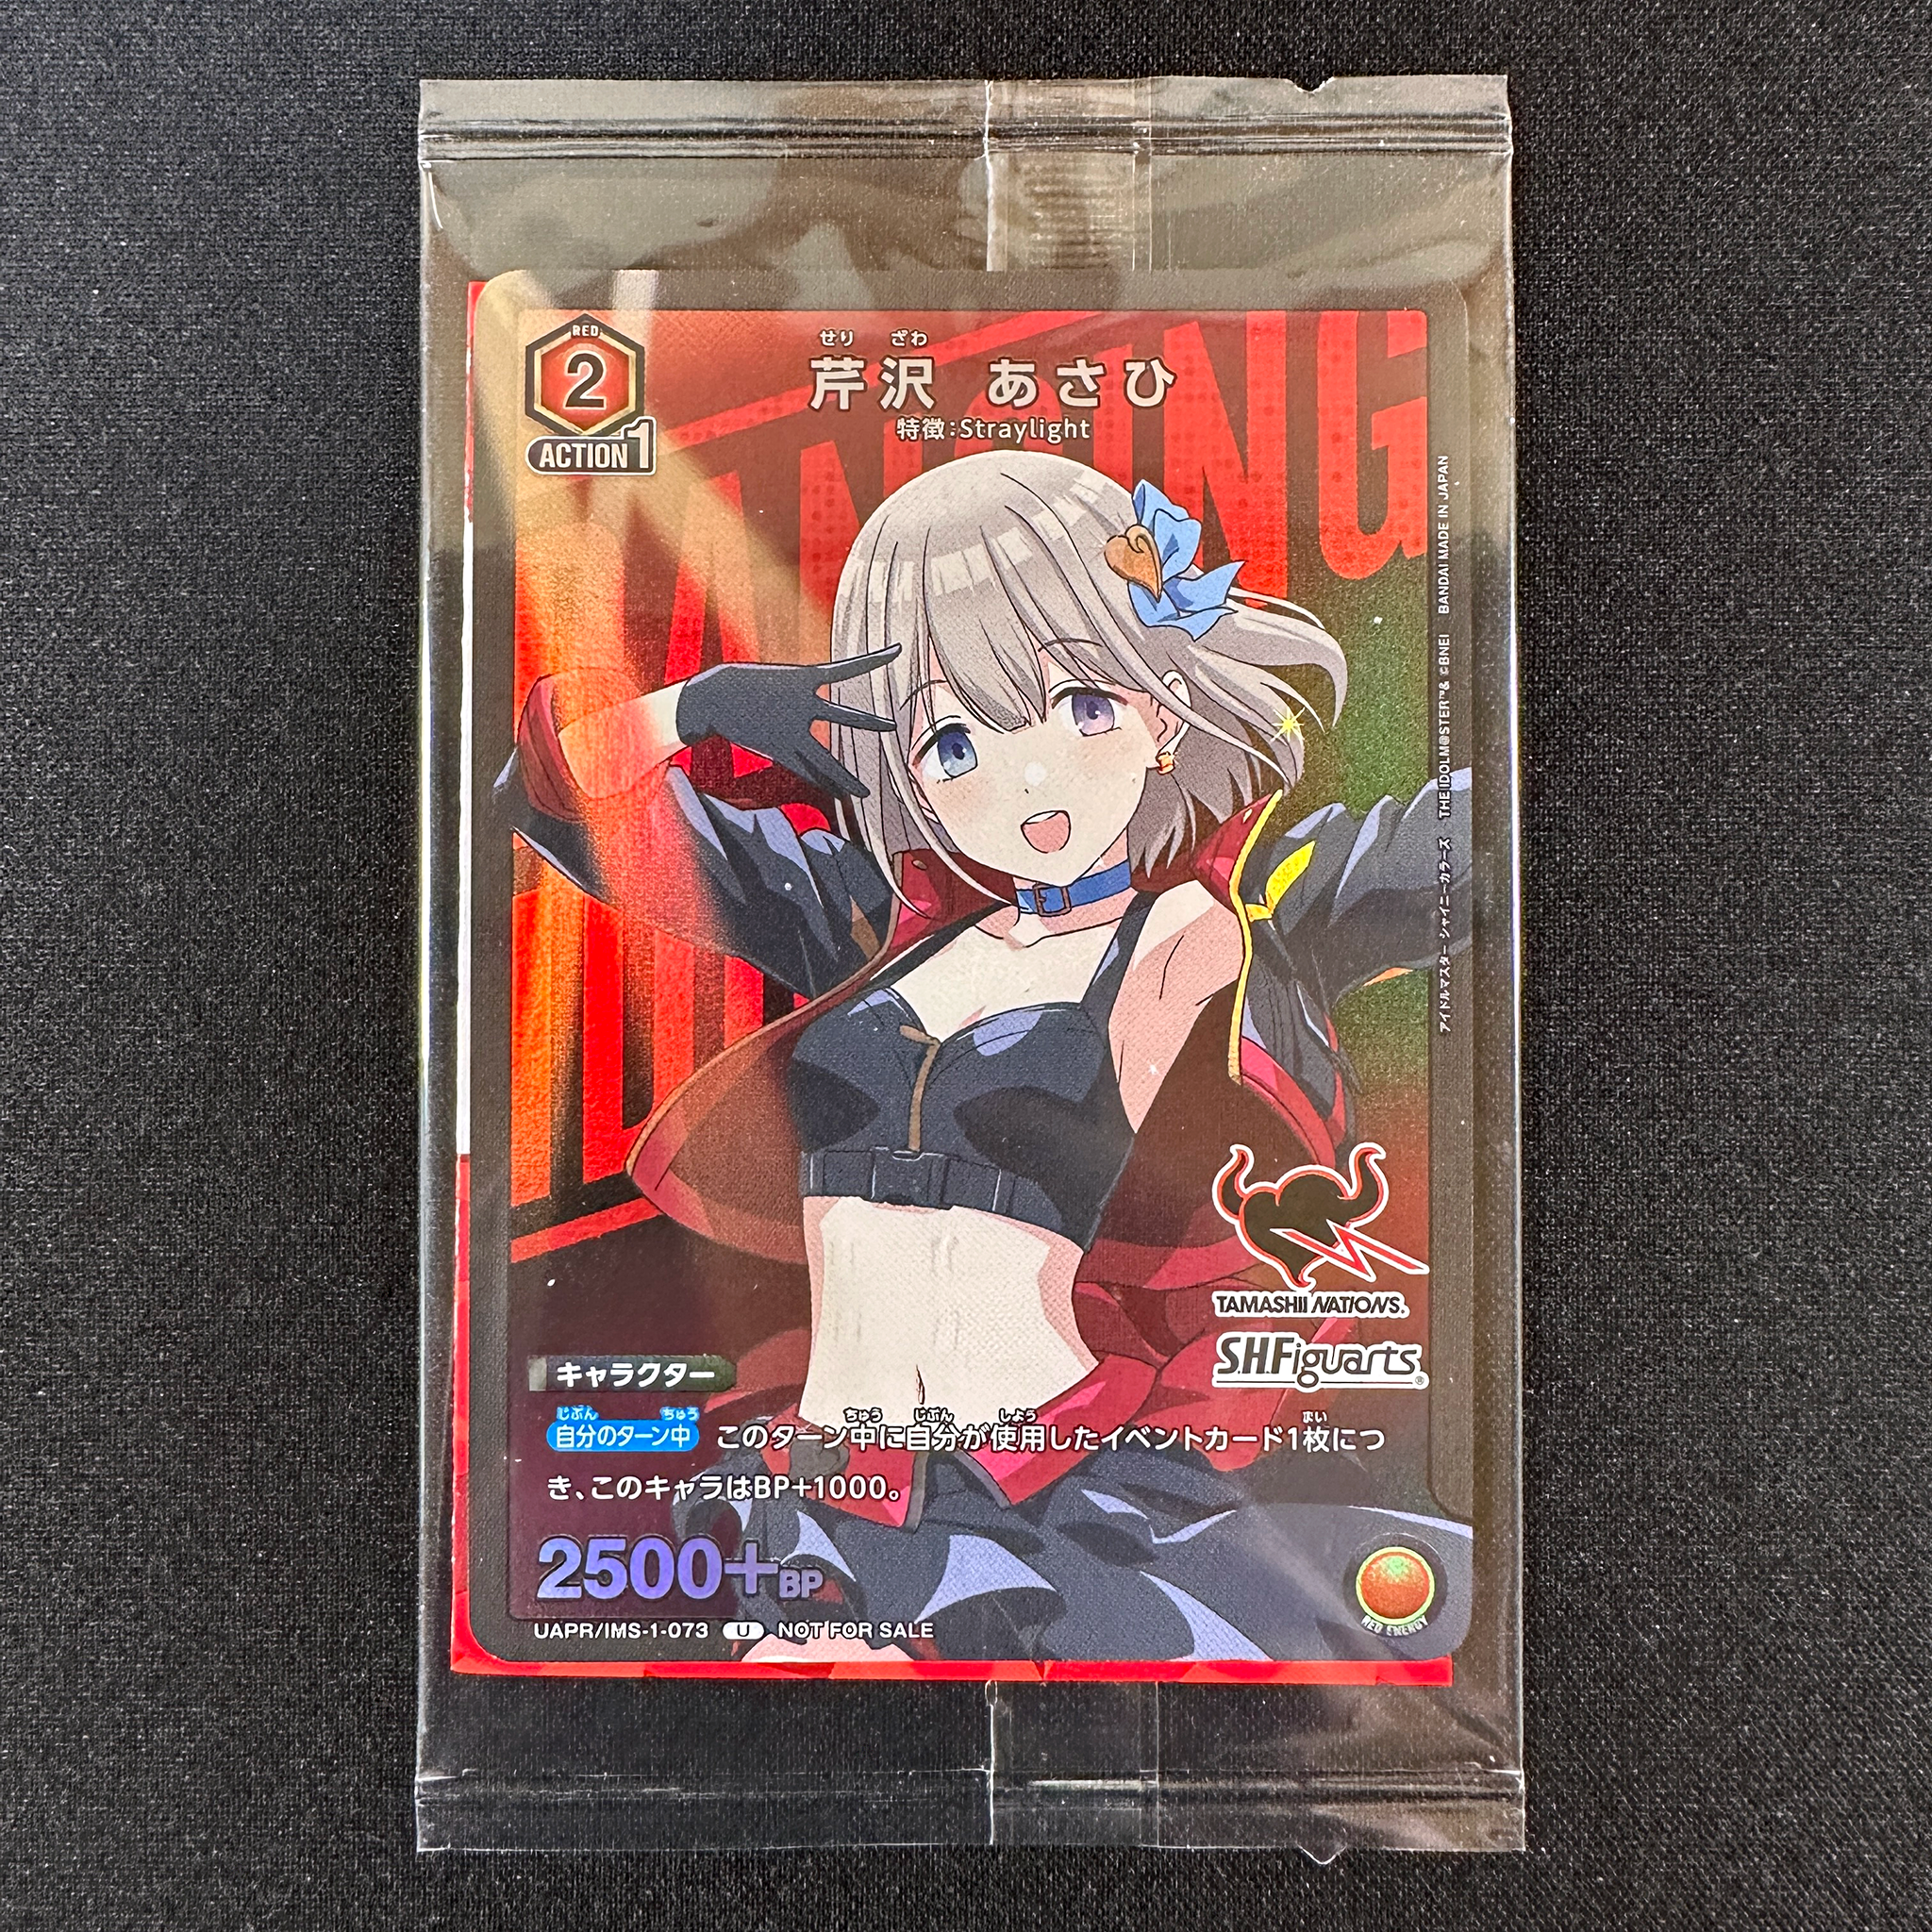 TRADING CARD GAME UNION ARENA UAPR/IMS-1-073  Release date: April 2023  THE IDOLM@STER SHINCOLORS  Serizawa Asahi Straylight